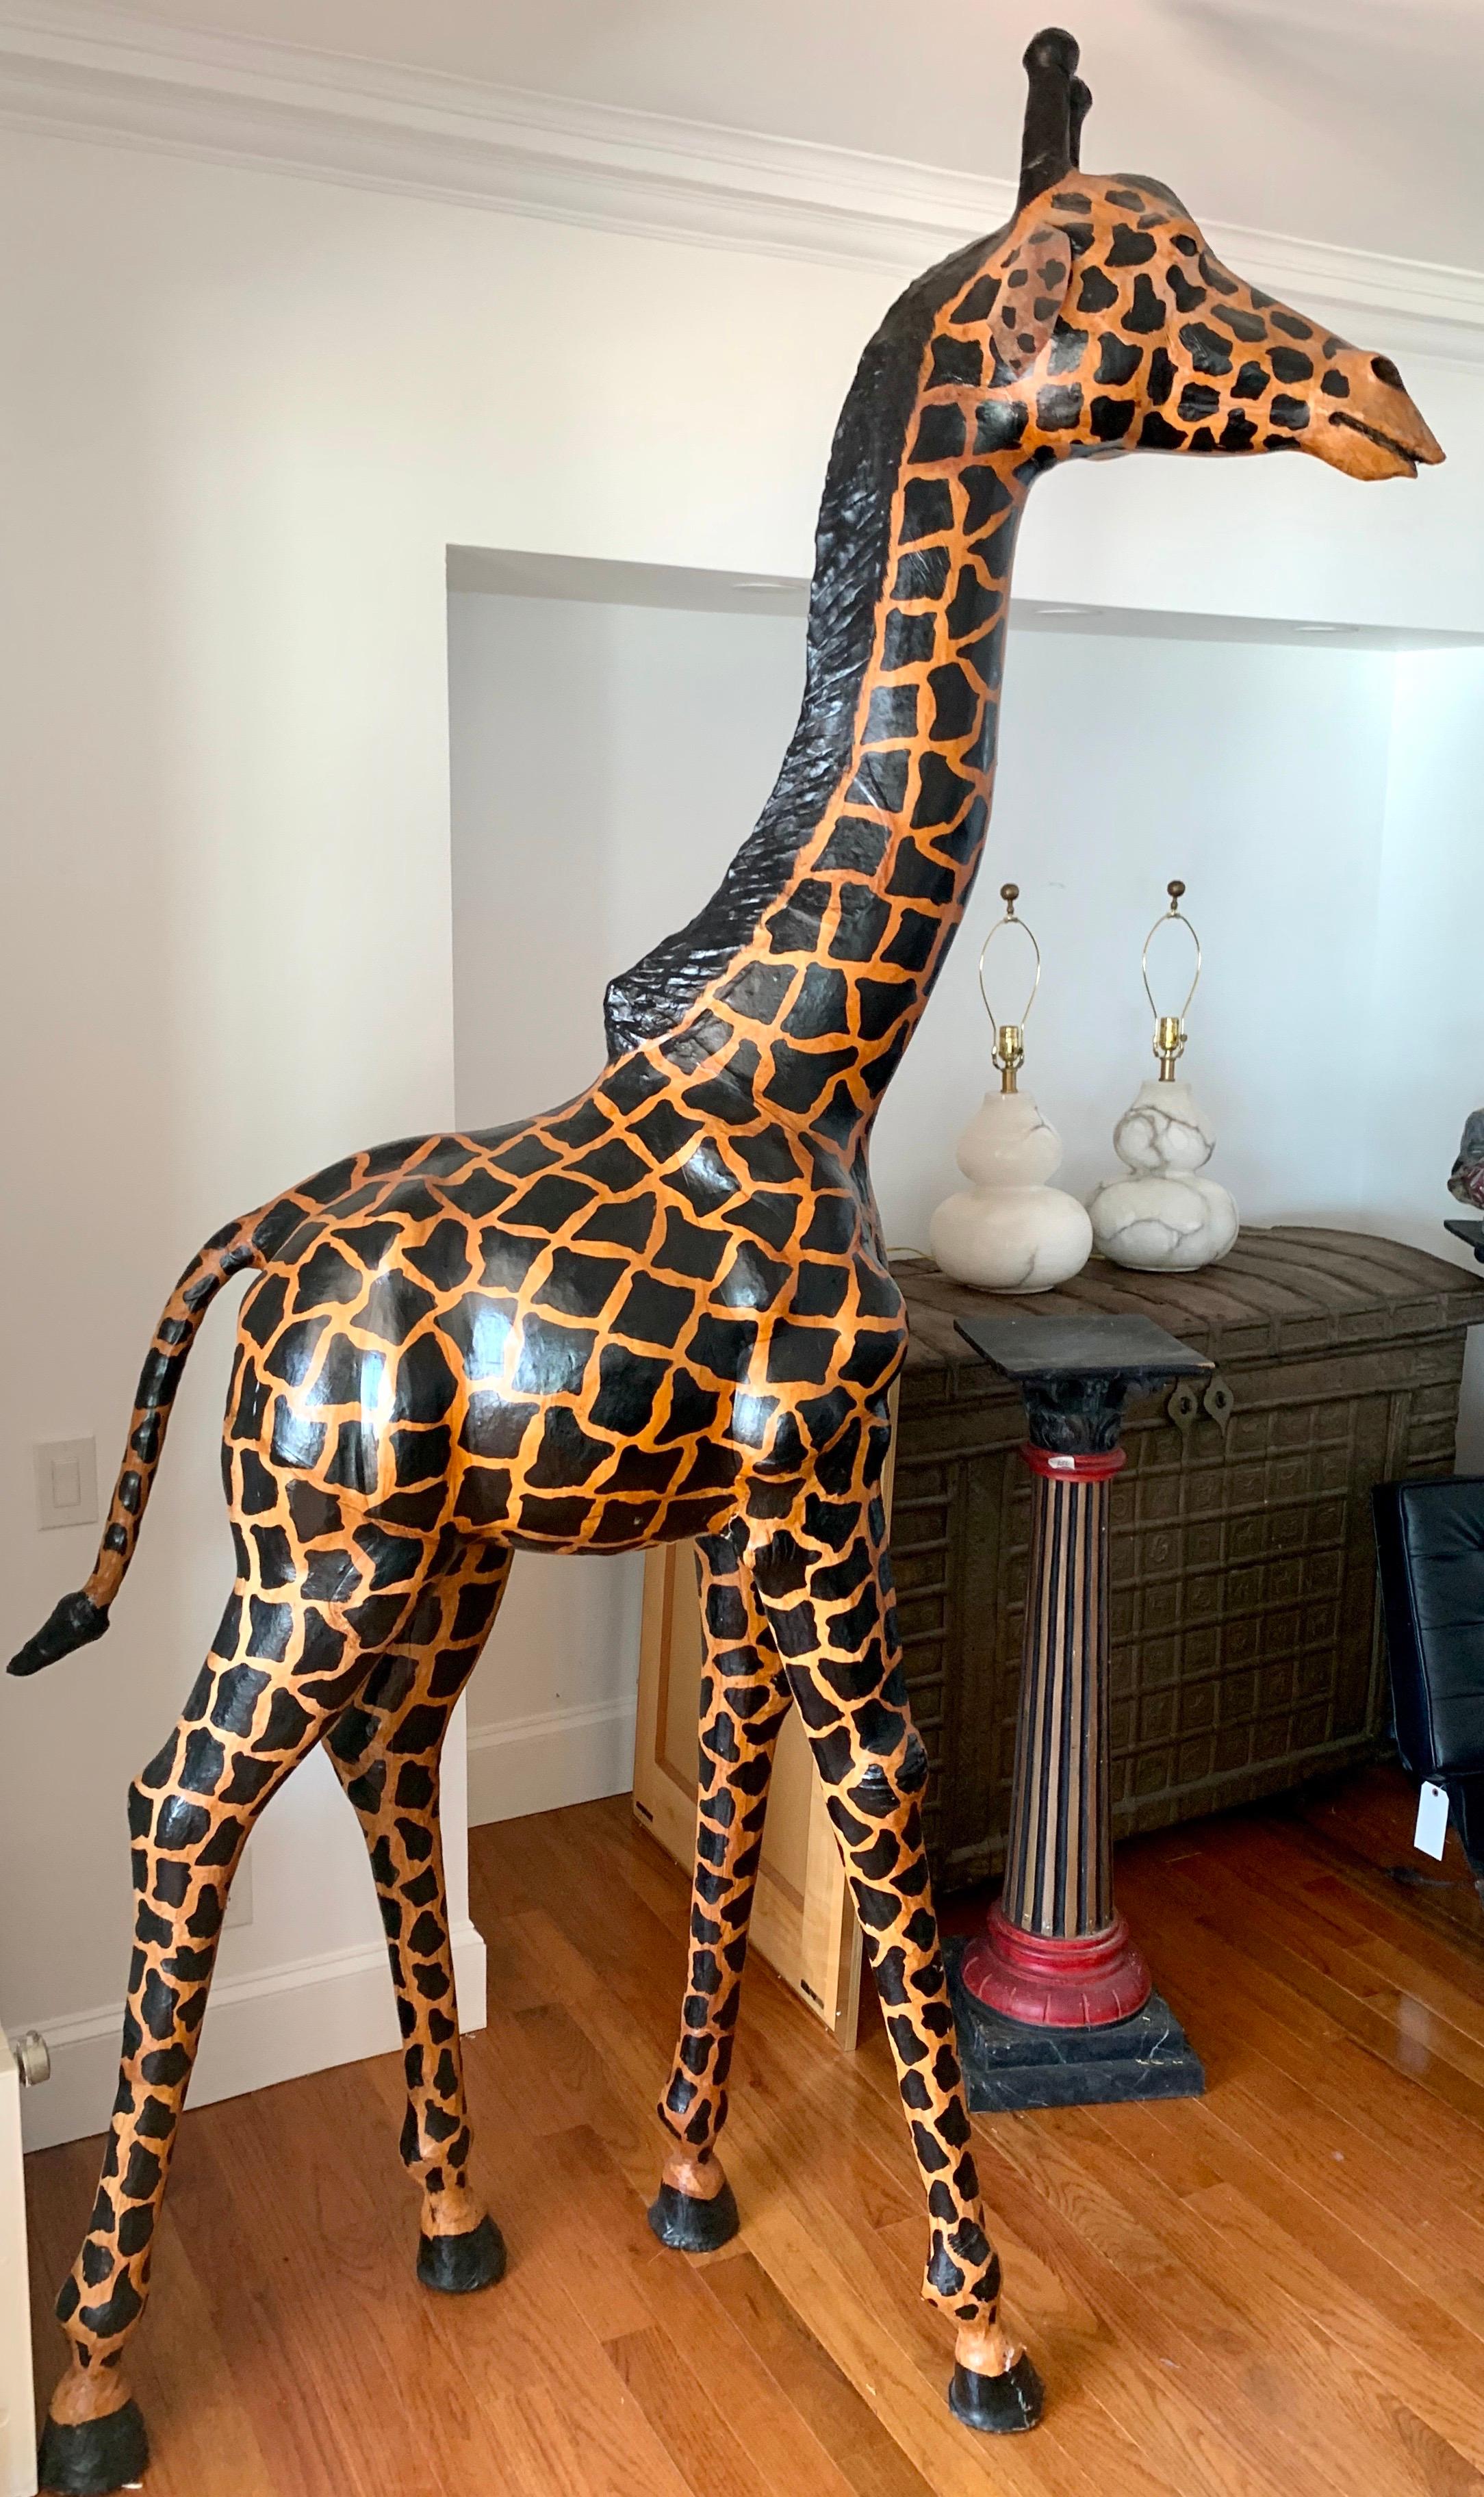 Large Life-Size Leather Giraffe Sculpture Almost Nine Feet Tall 11